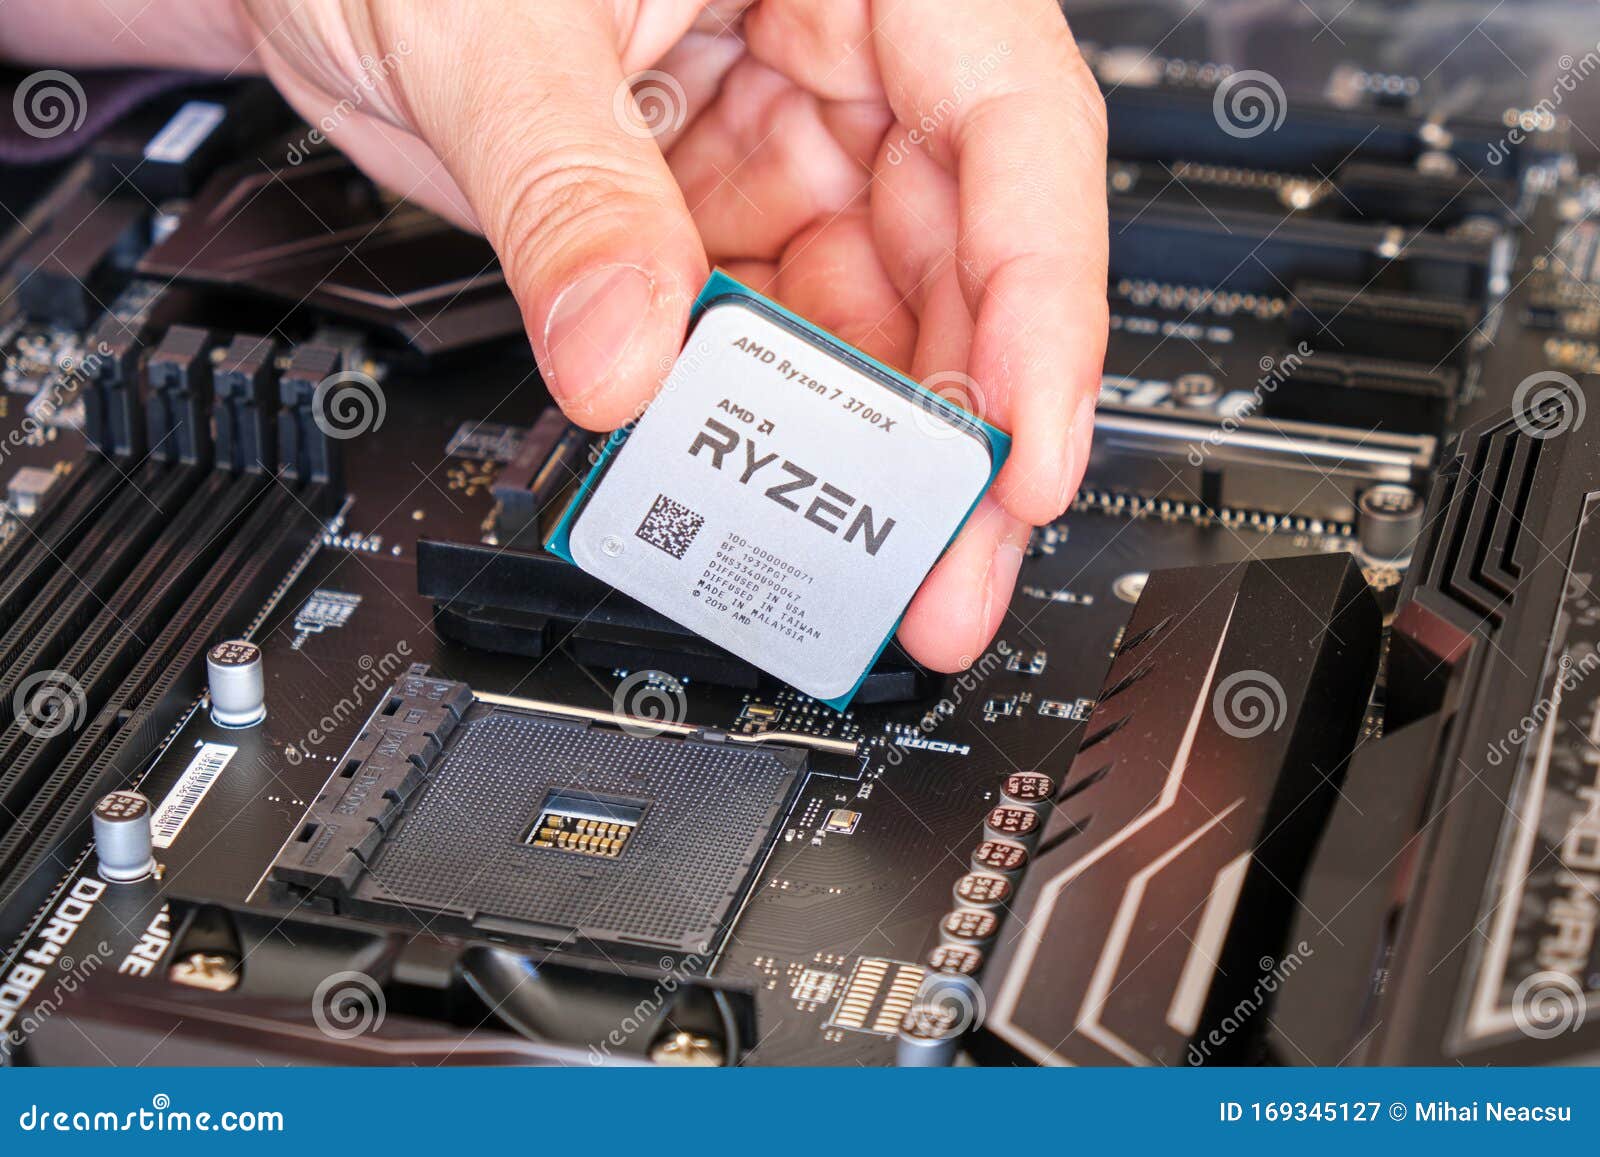 Amd Ryzen 3700x Cpu In Technician Fingers Above A Motherboard Part Of A Custom Pc Build Editorial Photography Image Of Future Fingers 169345127